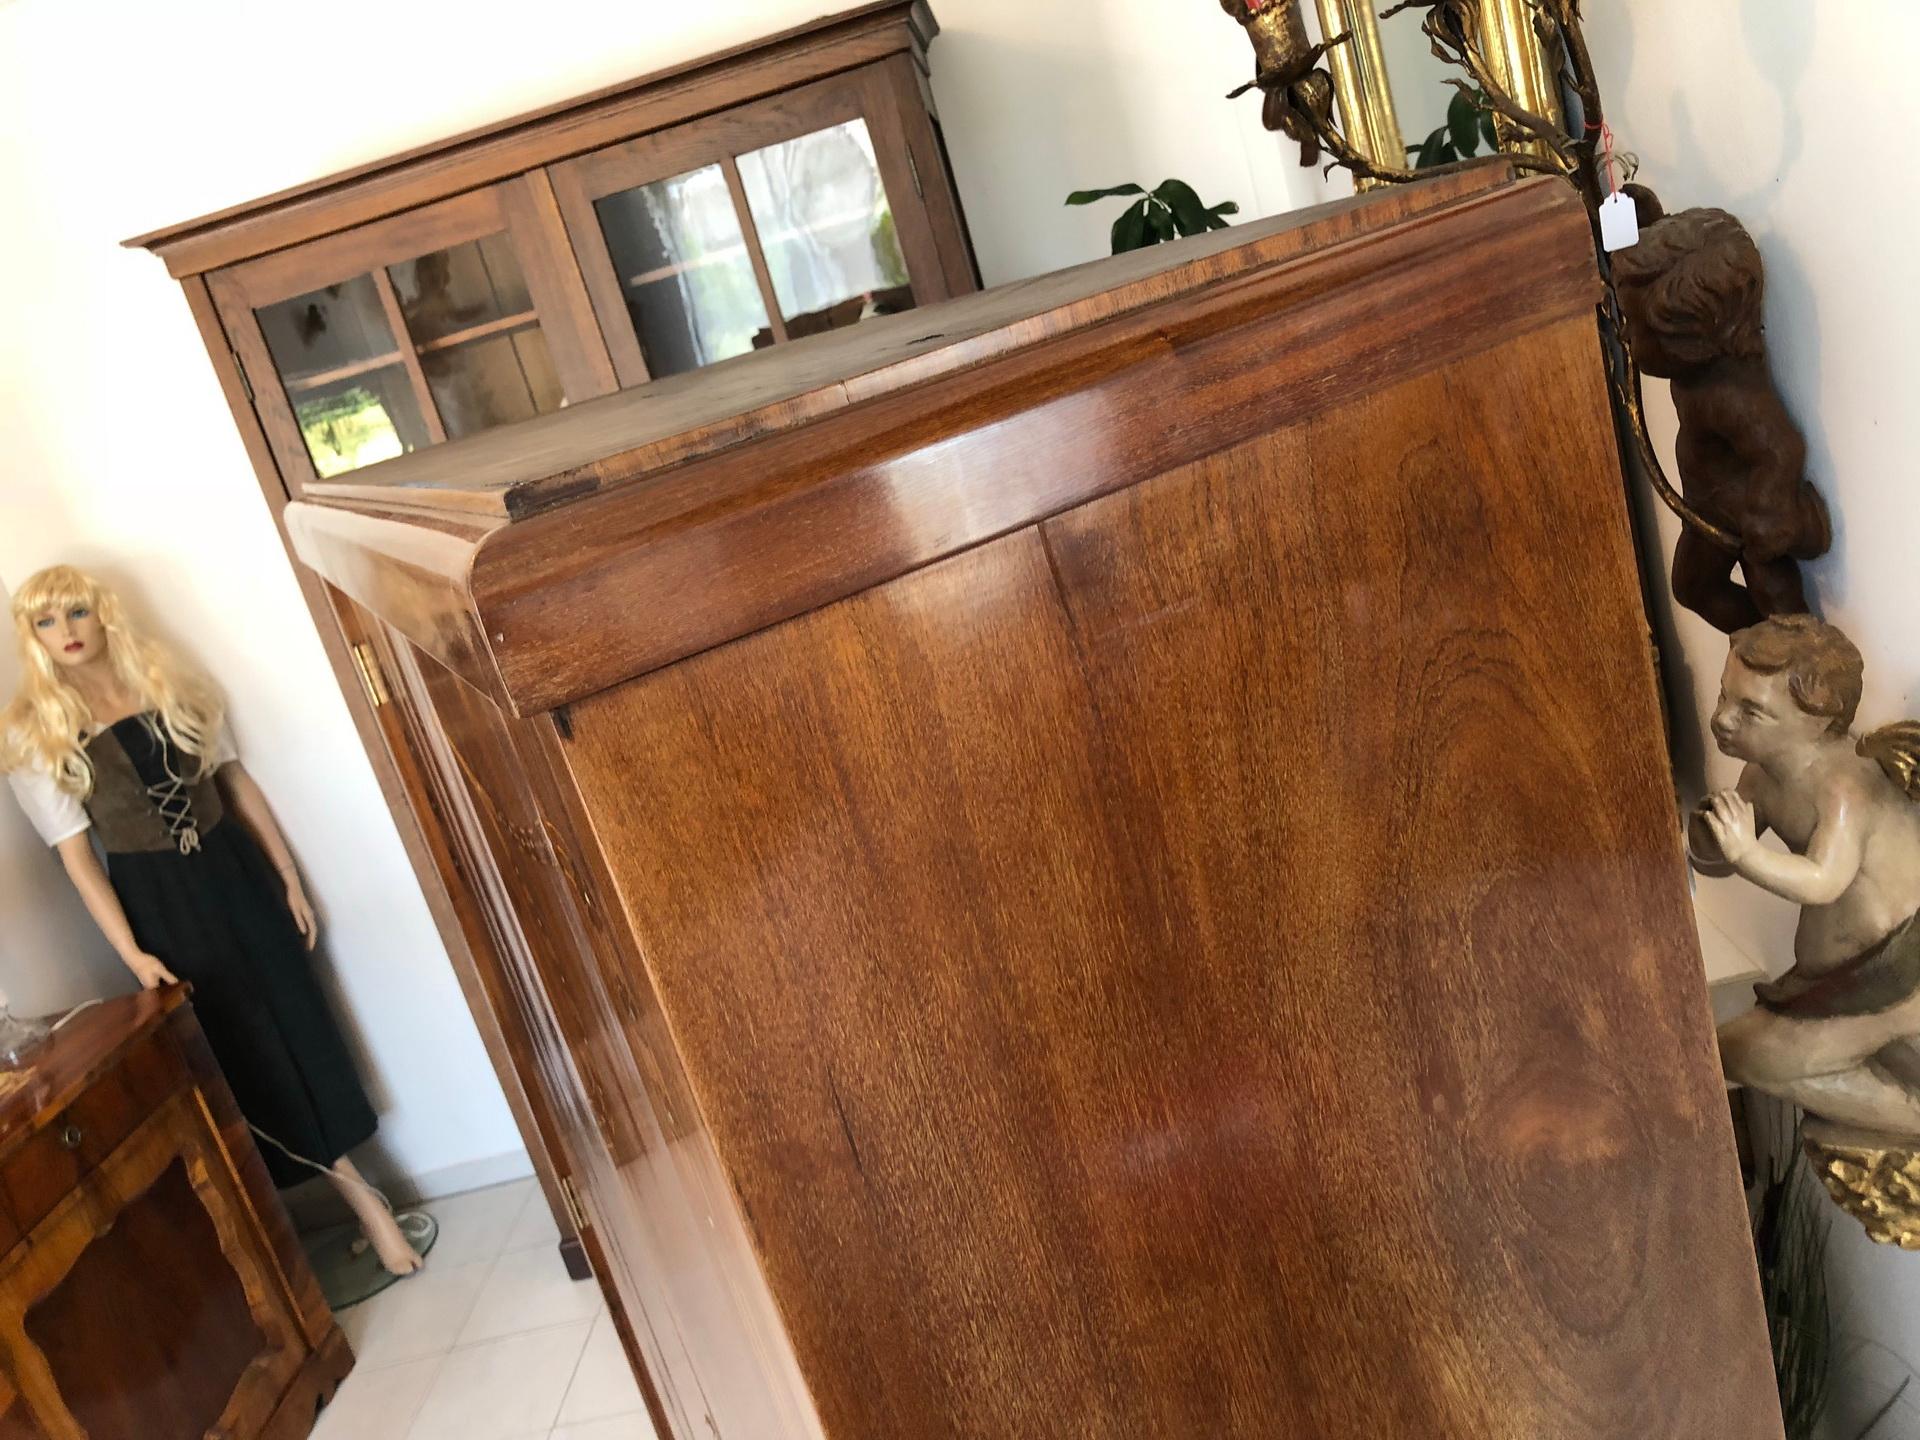 Original exquisite Art Nouveau dresser or wardrobe cabinet.
This is a very nice original piece from the period around 1920, a beautiful dresser with stunning floral inlays on its front / door panels.
This is a dreamlike Art Nouveau item with